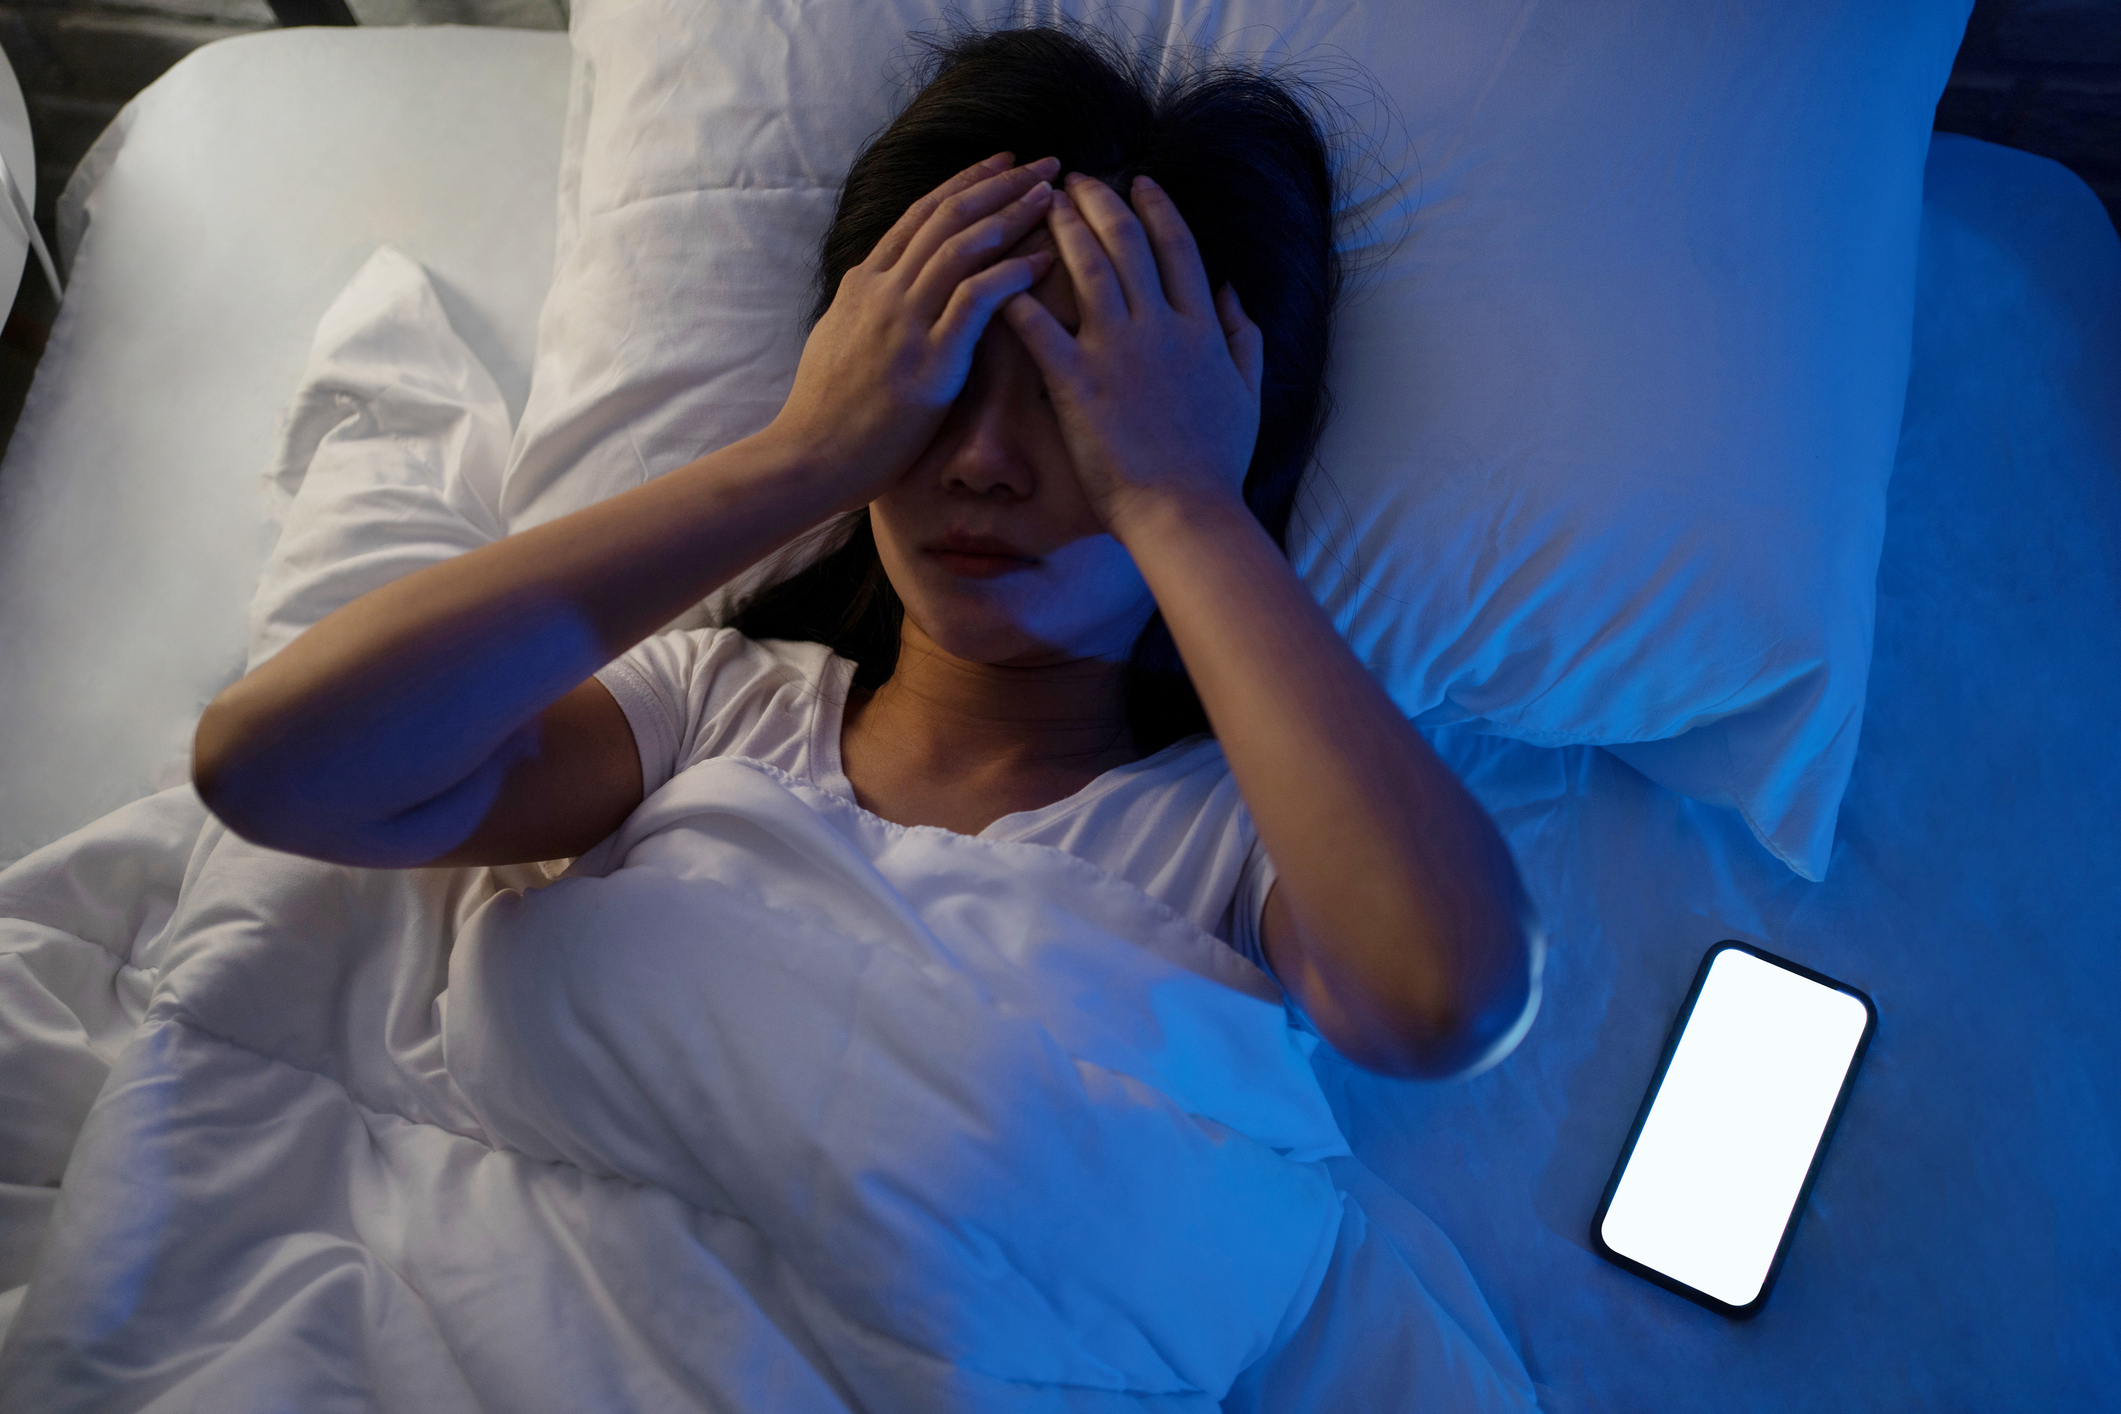 Woman in bed covering face with hands, phone lit on the side, suggesting insomnia or stress